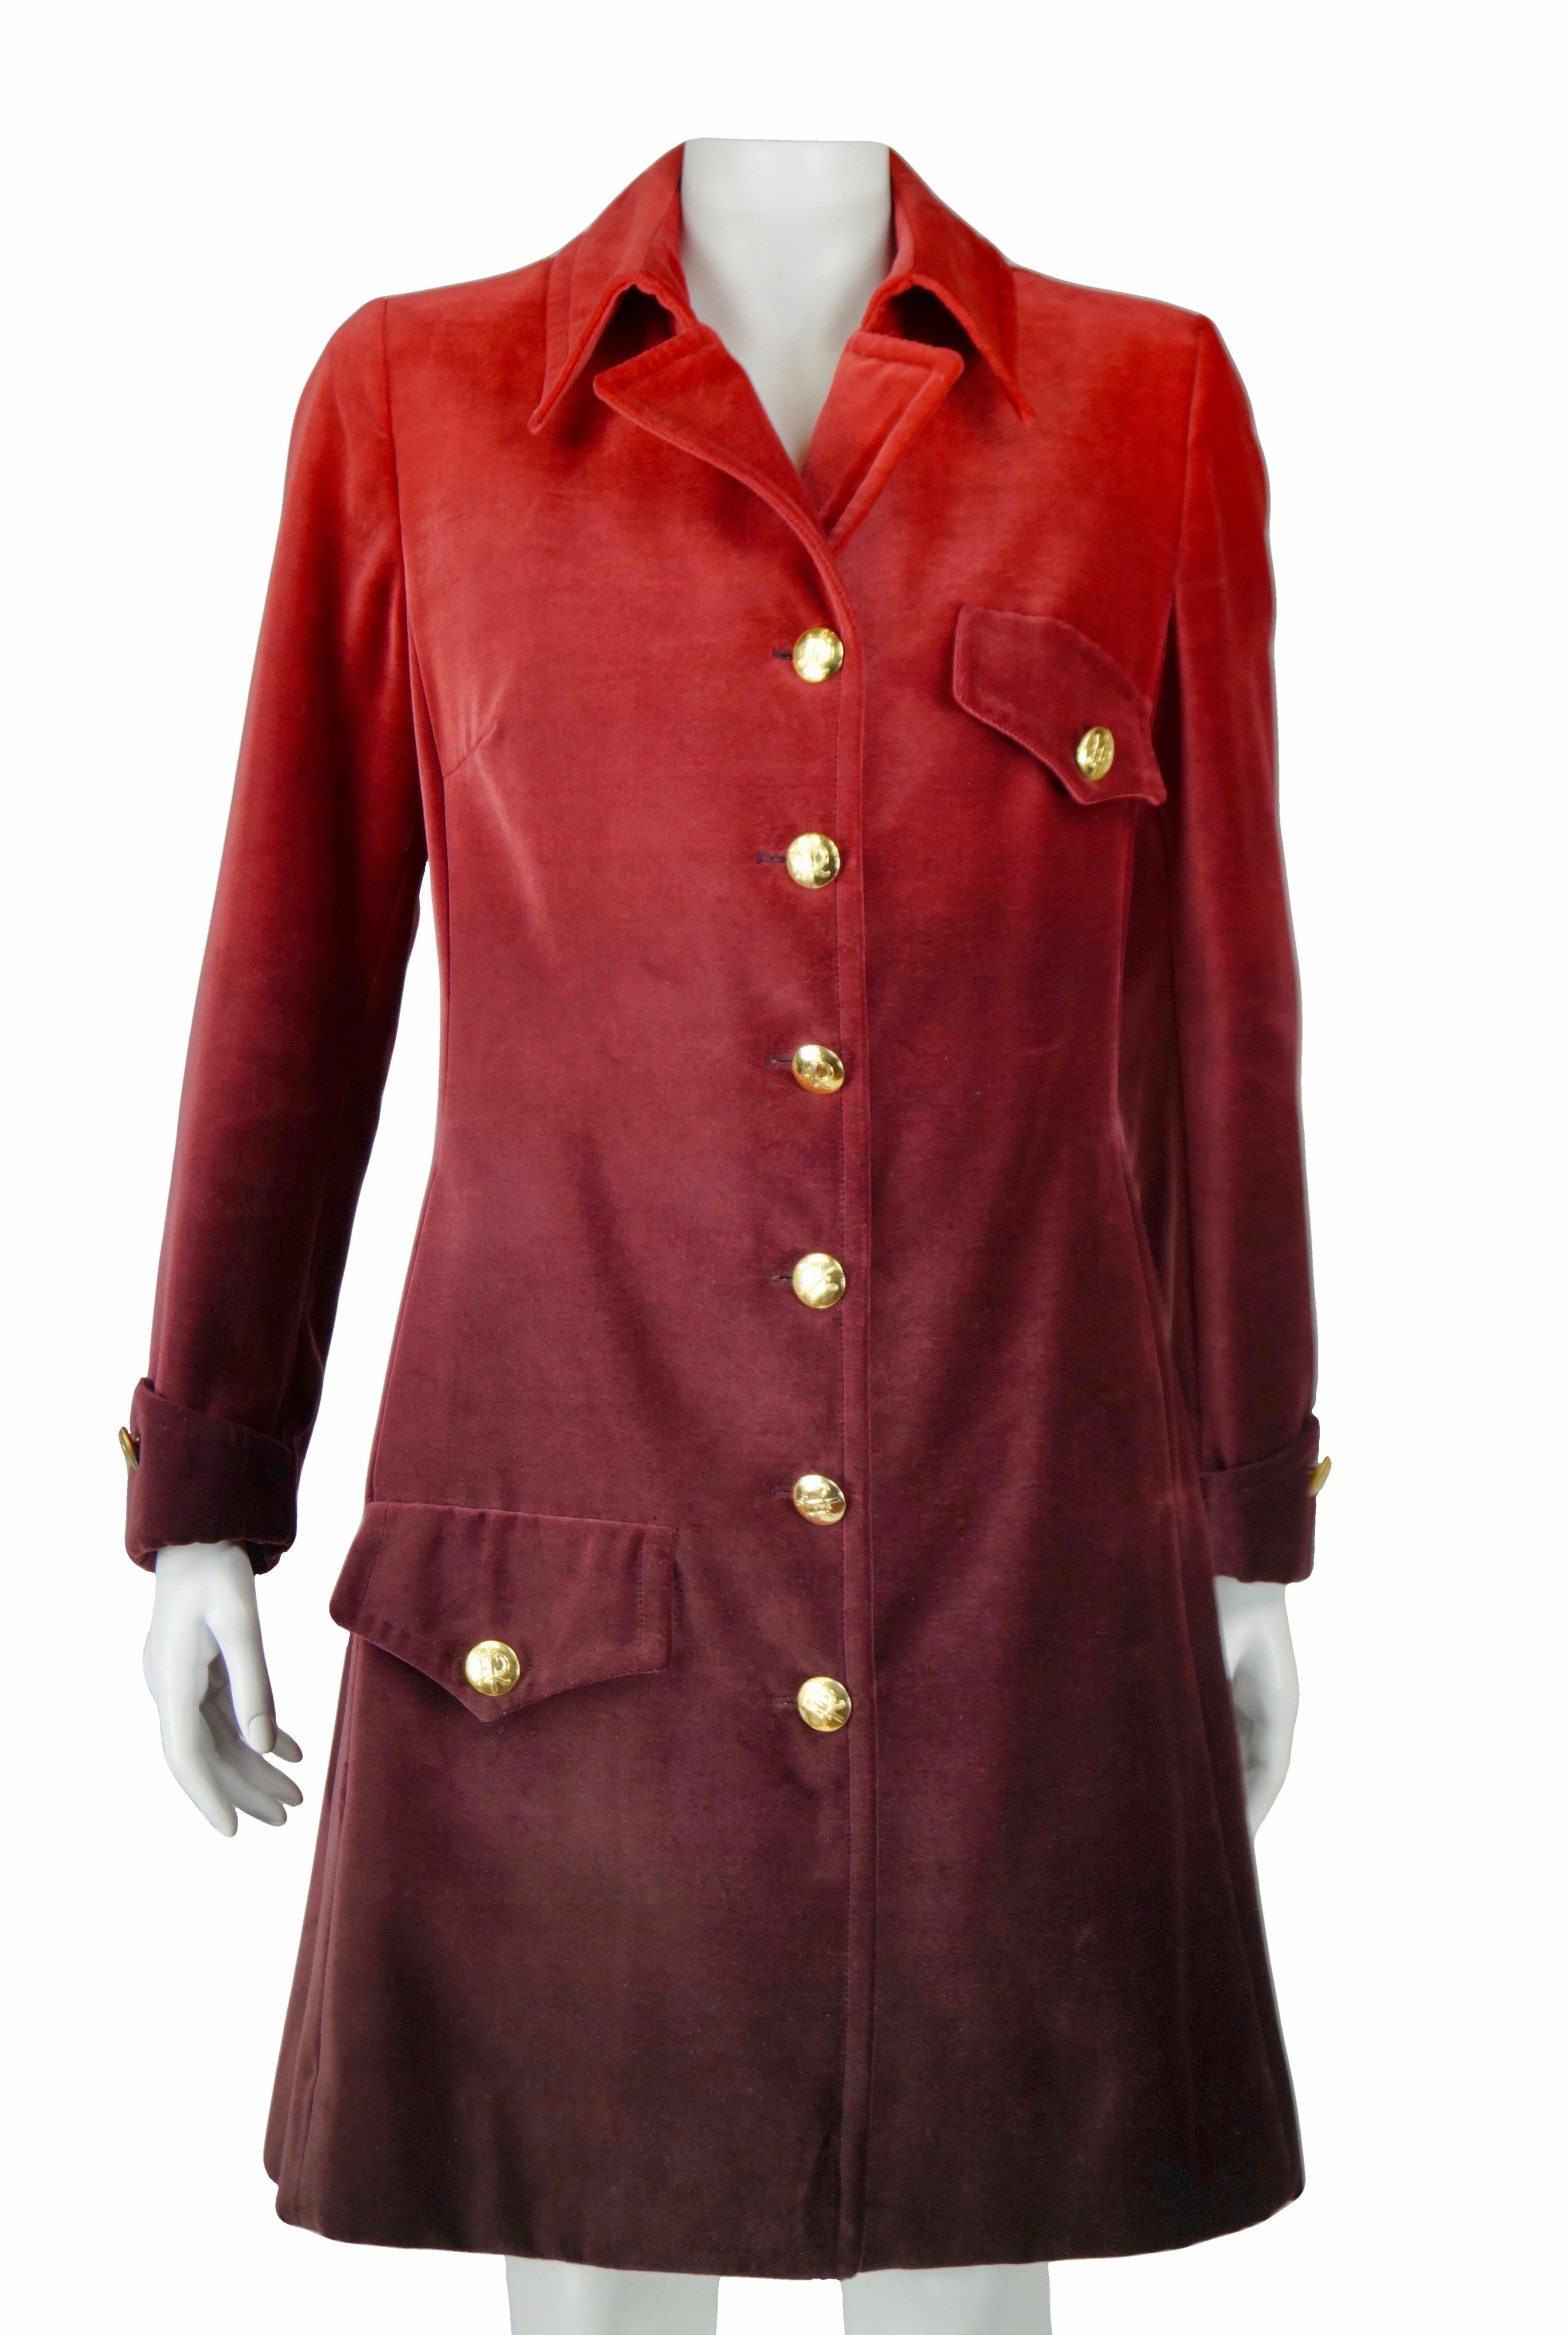 Roberta di Camerino red degradé velvet coat vintage 70s
Military style with golden buttons with monogram Roberta di Camerino
Cotton velvet
Lined
Size label and fabric composition not present
Made in Italy
Alta measures:
Length cm. 90
Shoulders cm.